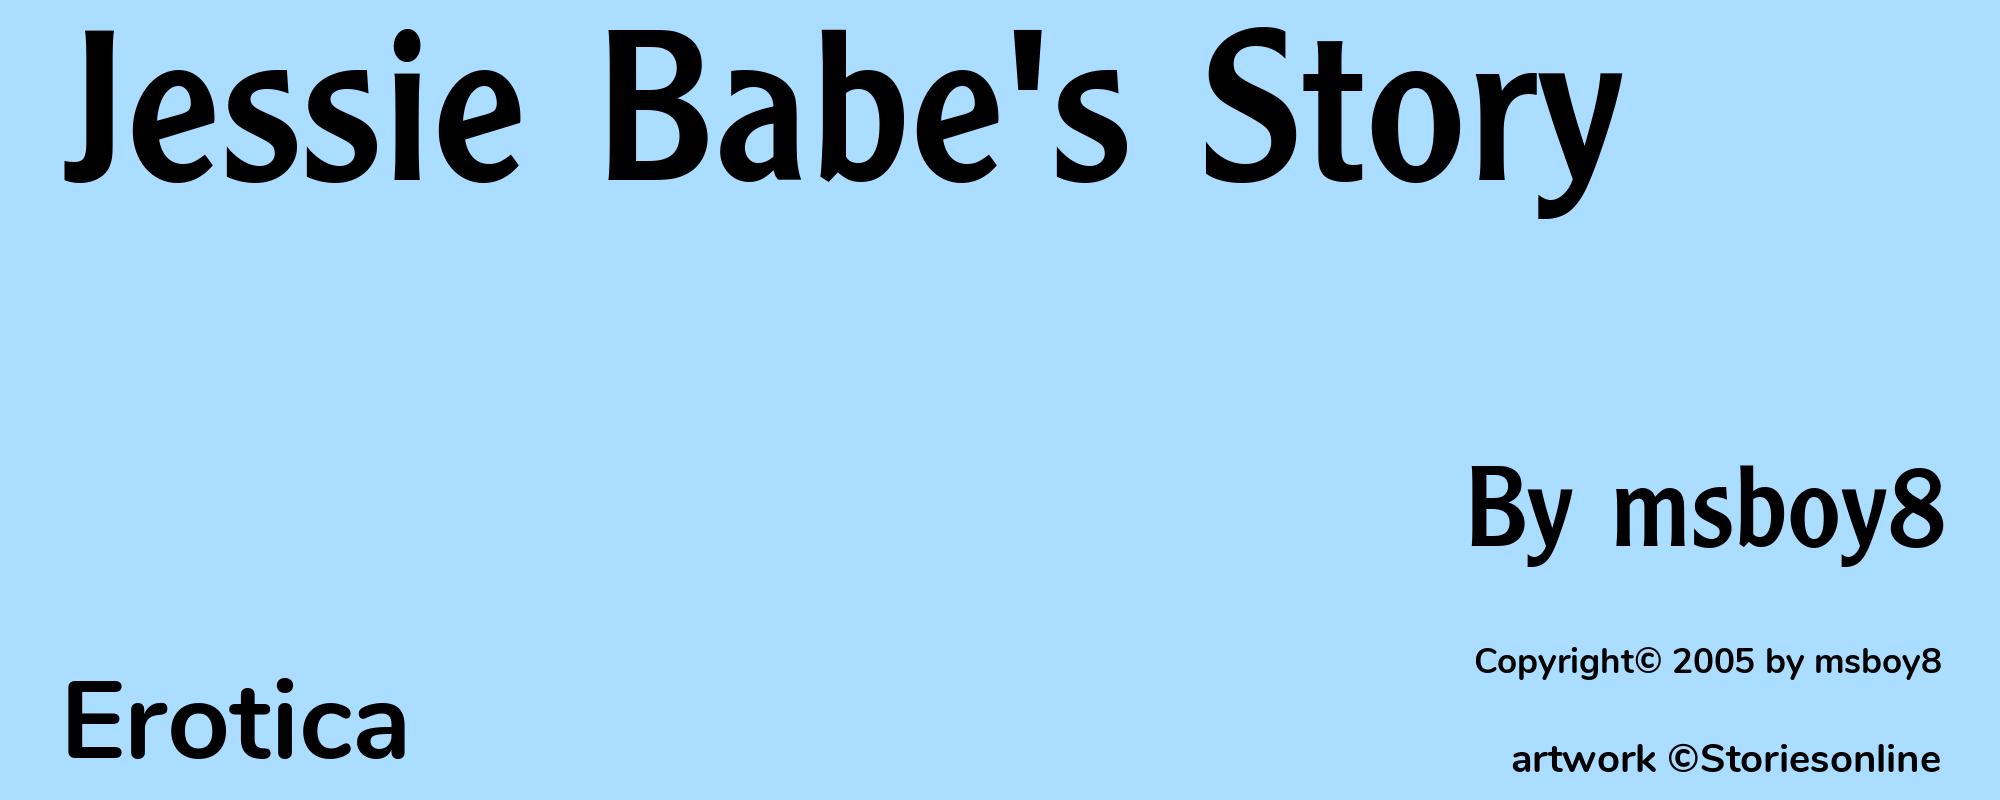 Jessie Babe's Story - Cover